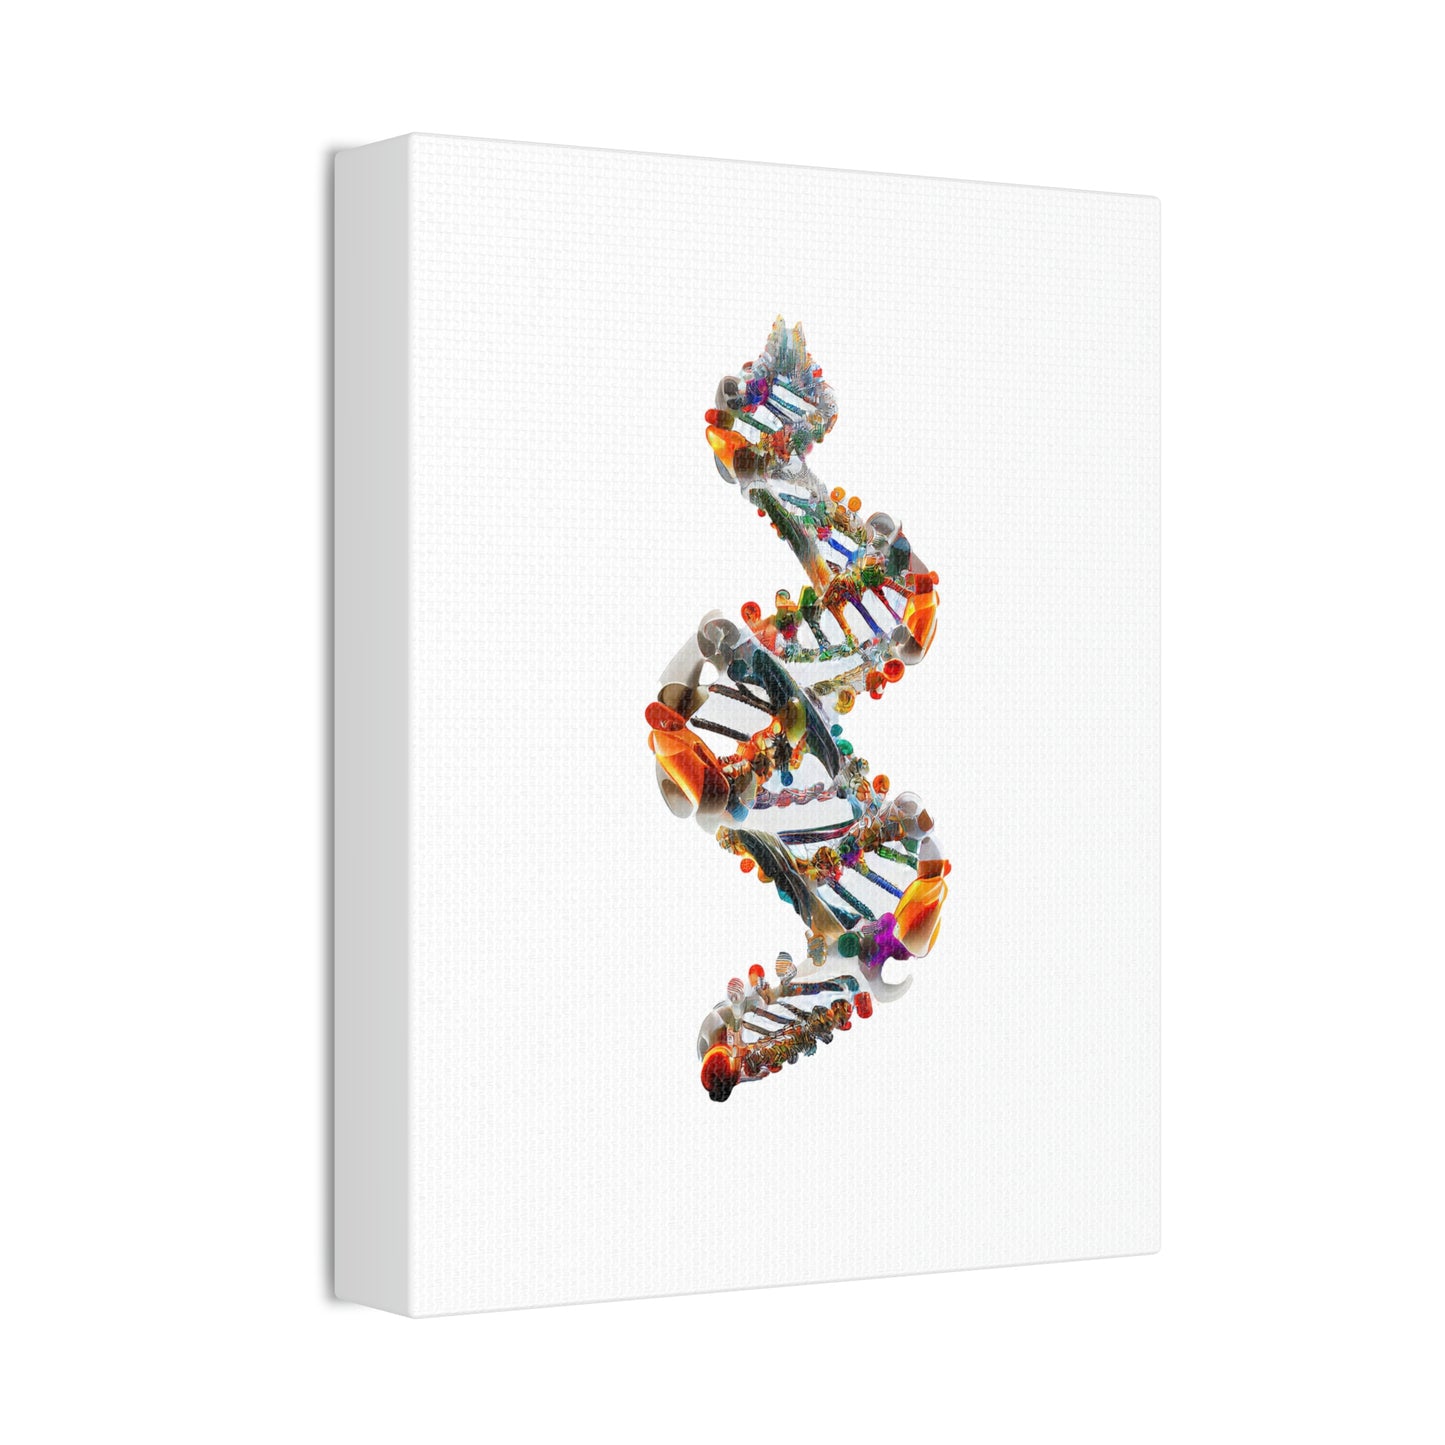 Quantum Double Helix DNA, ꓥVꓥ Generated - Polyester Canvas